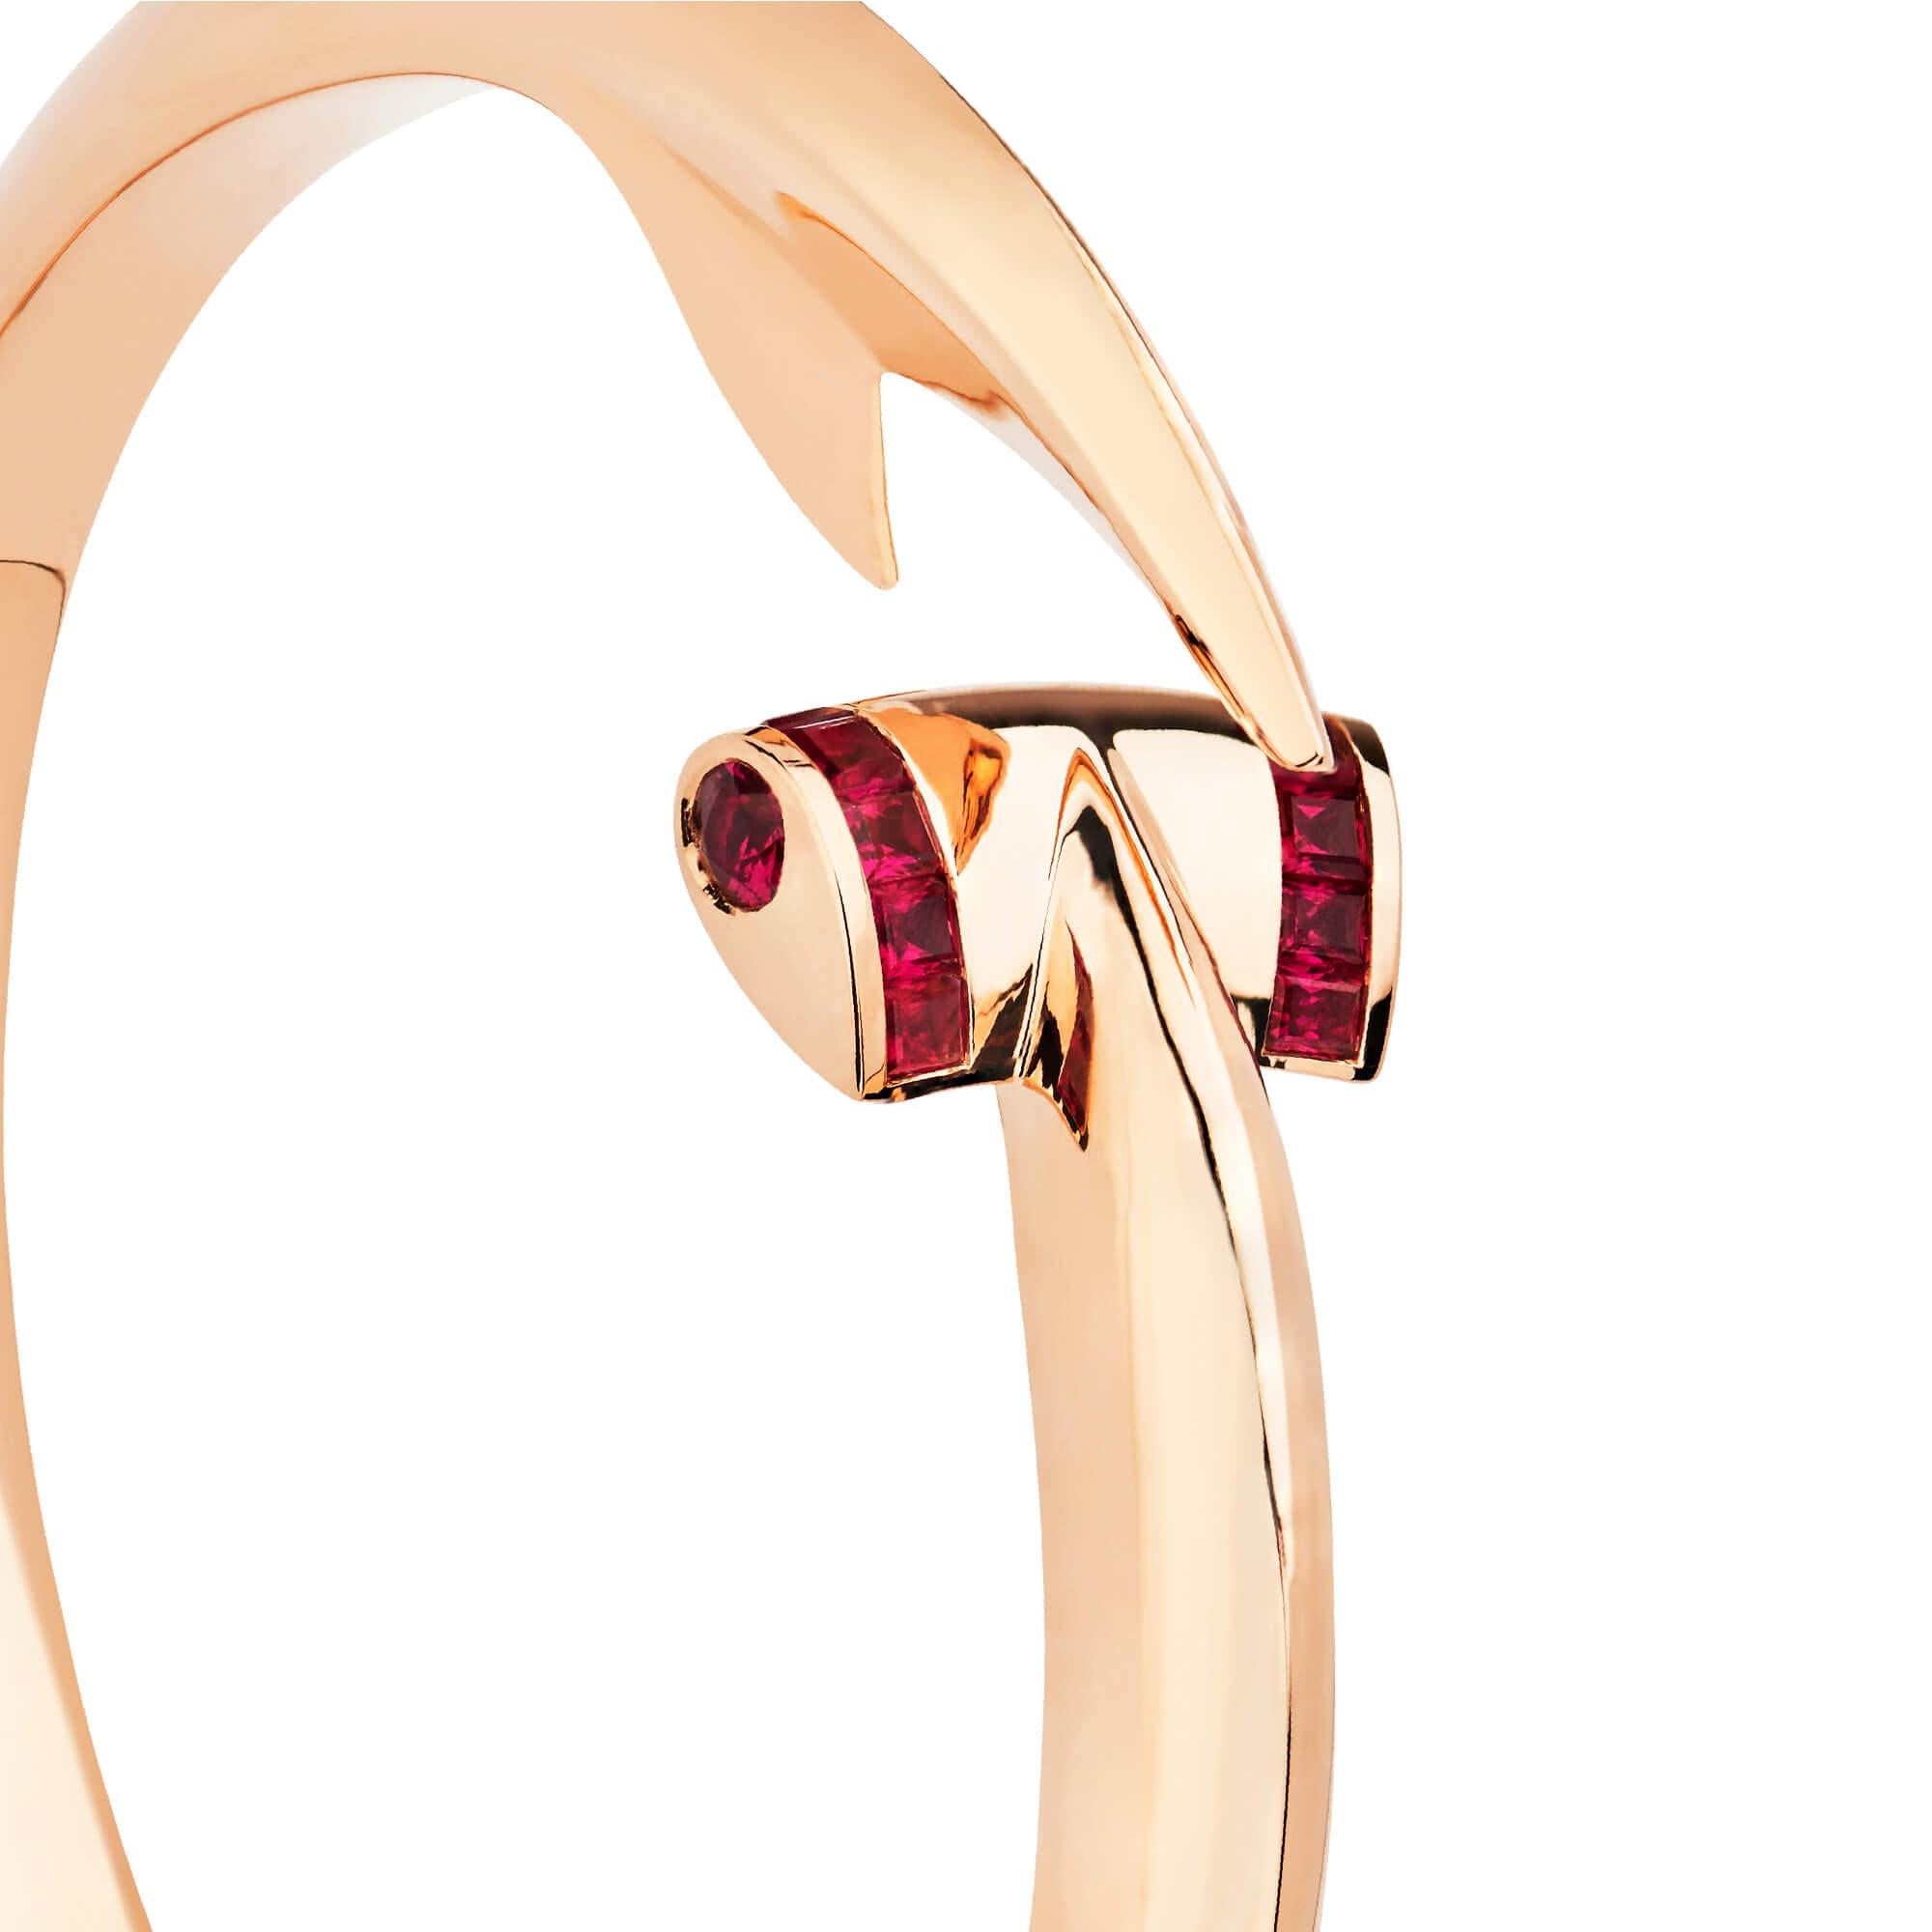 Inspired by the hammerhead shark and its ever-changing ocean home, this 18 karat rose gold statement cuff is a tribute to the wonderful creatures brought to life by Jules Verne in ‘Twenty Thousand Leagues Under the Sea’.

Hand crafted in 18ct rose